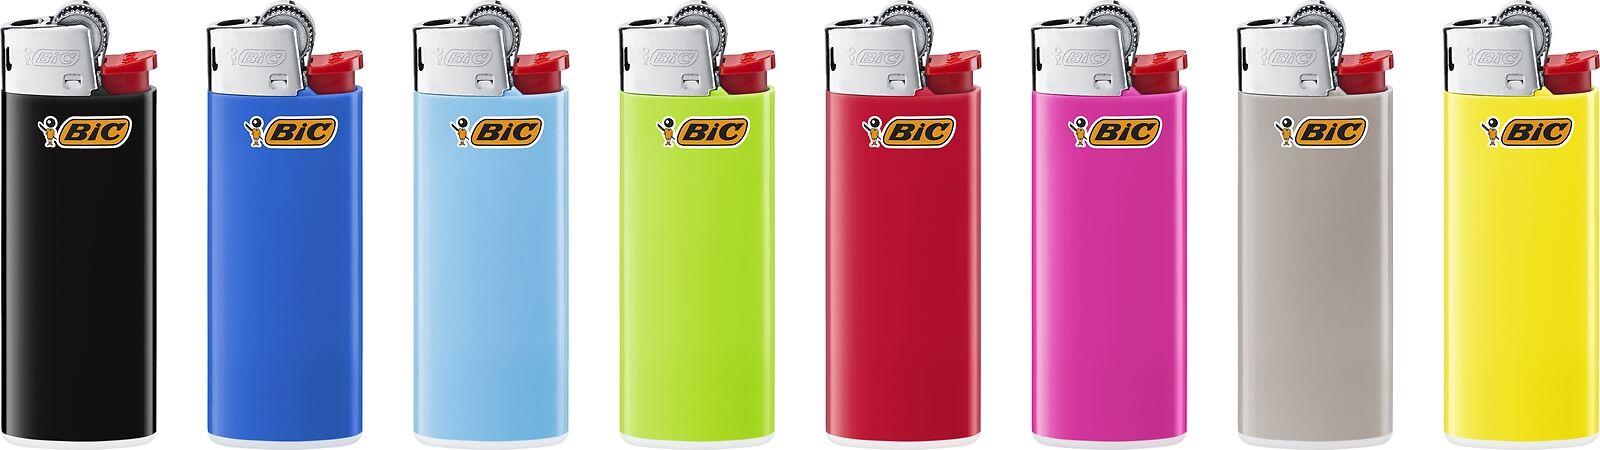 BIC Mini Lighter, Assorted Colors, Set of 8 Pocket Lighters, Safe and Reliable